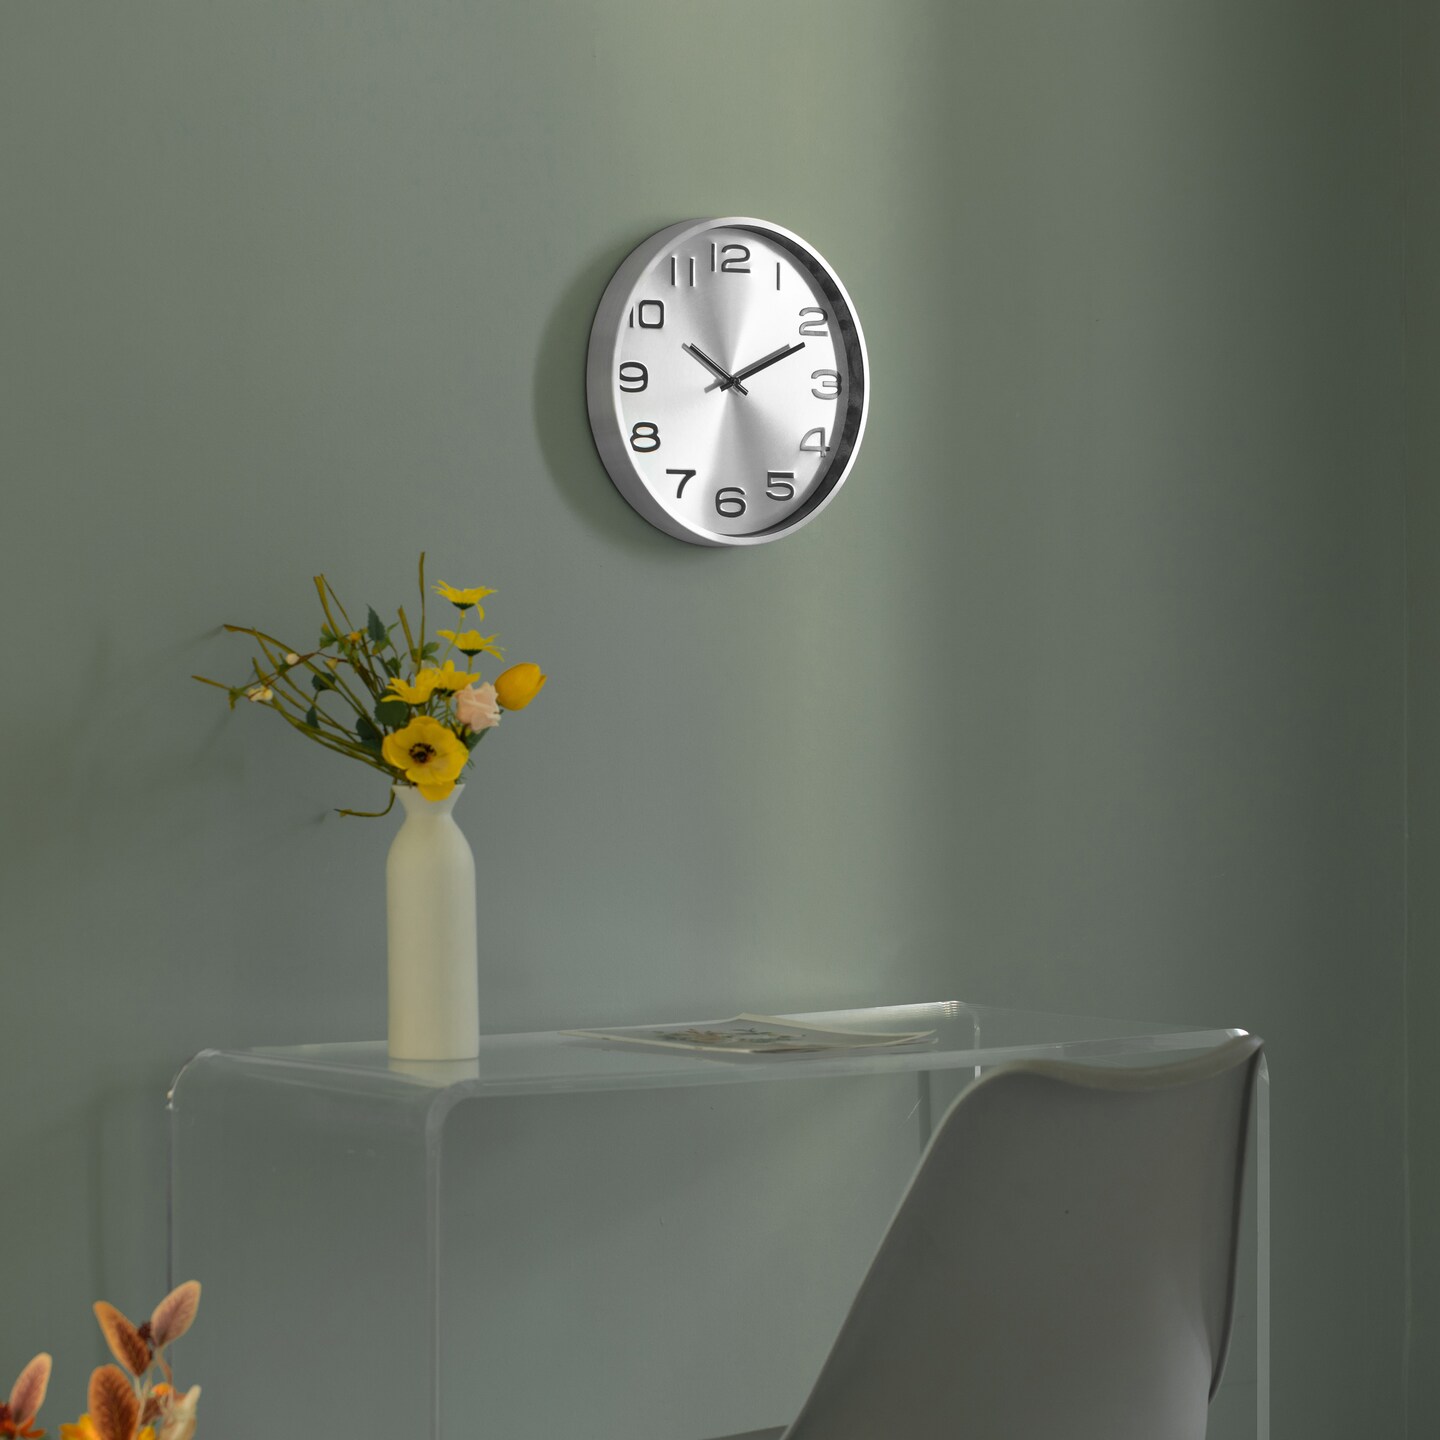 Aluminum Round Wall Clock - Modern Decor for Living Room, Kitchen, or Dining Room - 12 in Decorative Timepiece with Sleek Design - Large Round Clock for Home - Silent Ticking - Battery Operated